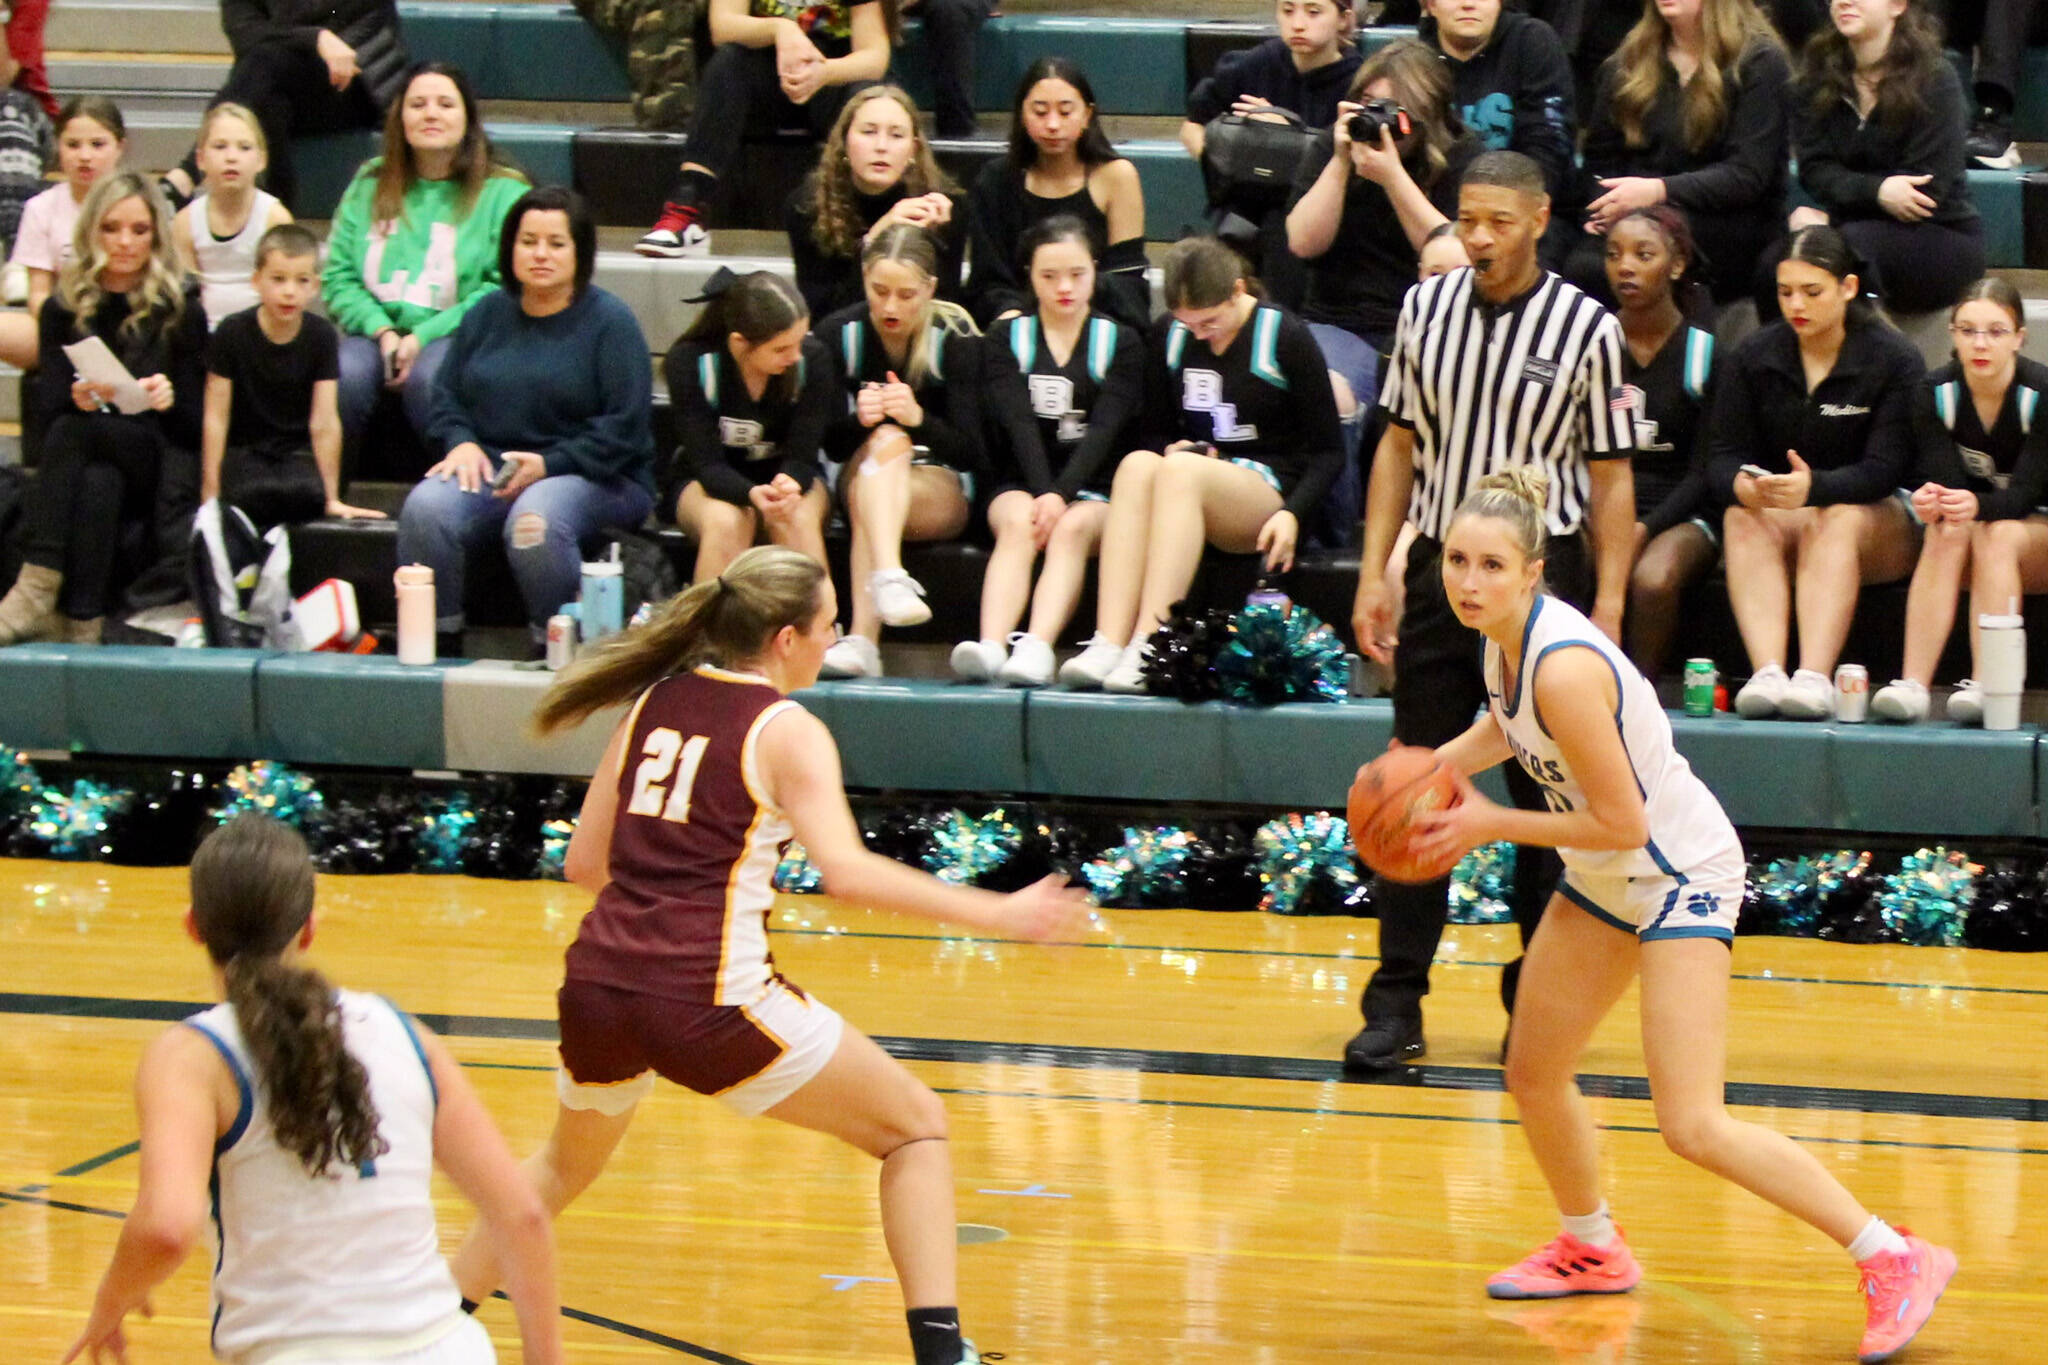 Bonney Lake Panthers senior Evin Elias drives down the court in a Nov. 29 game against the EHS girls. Photo by Andy Orozco